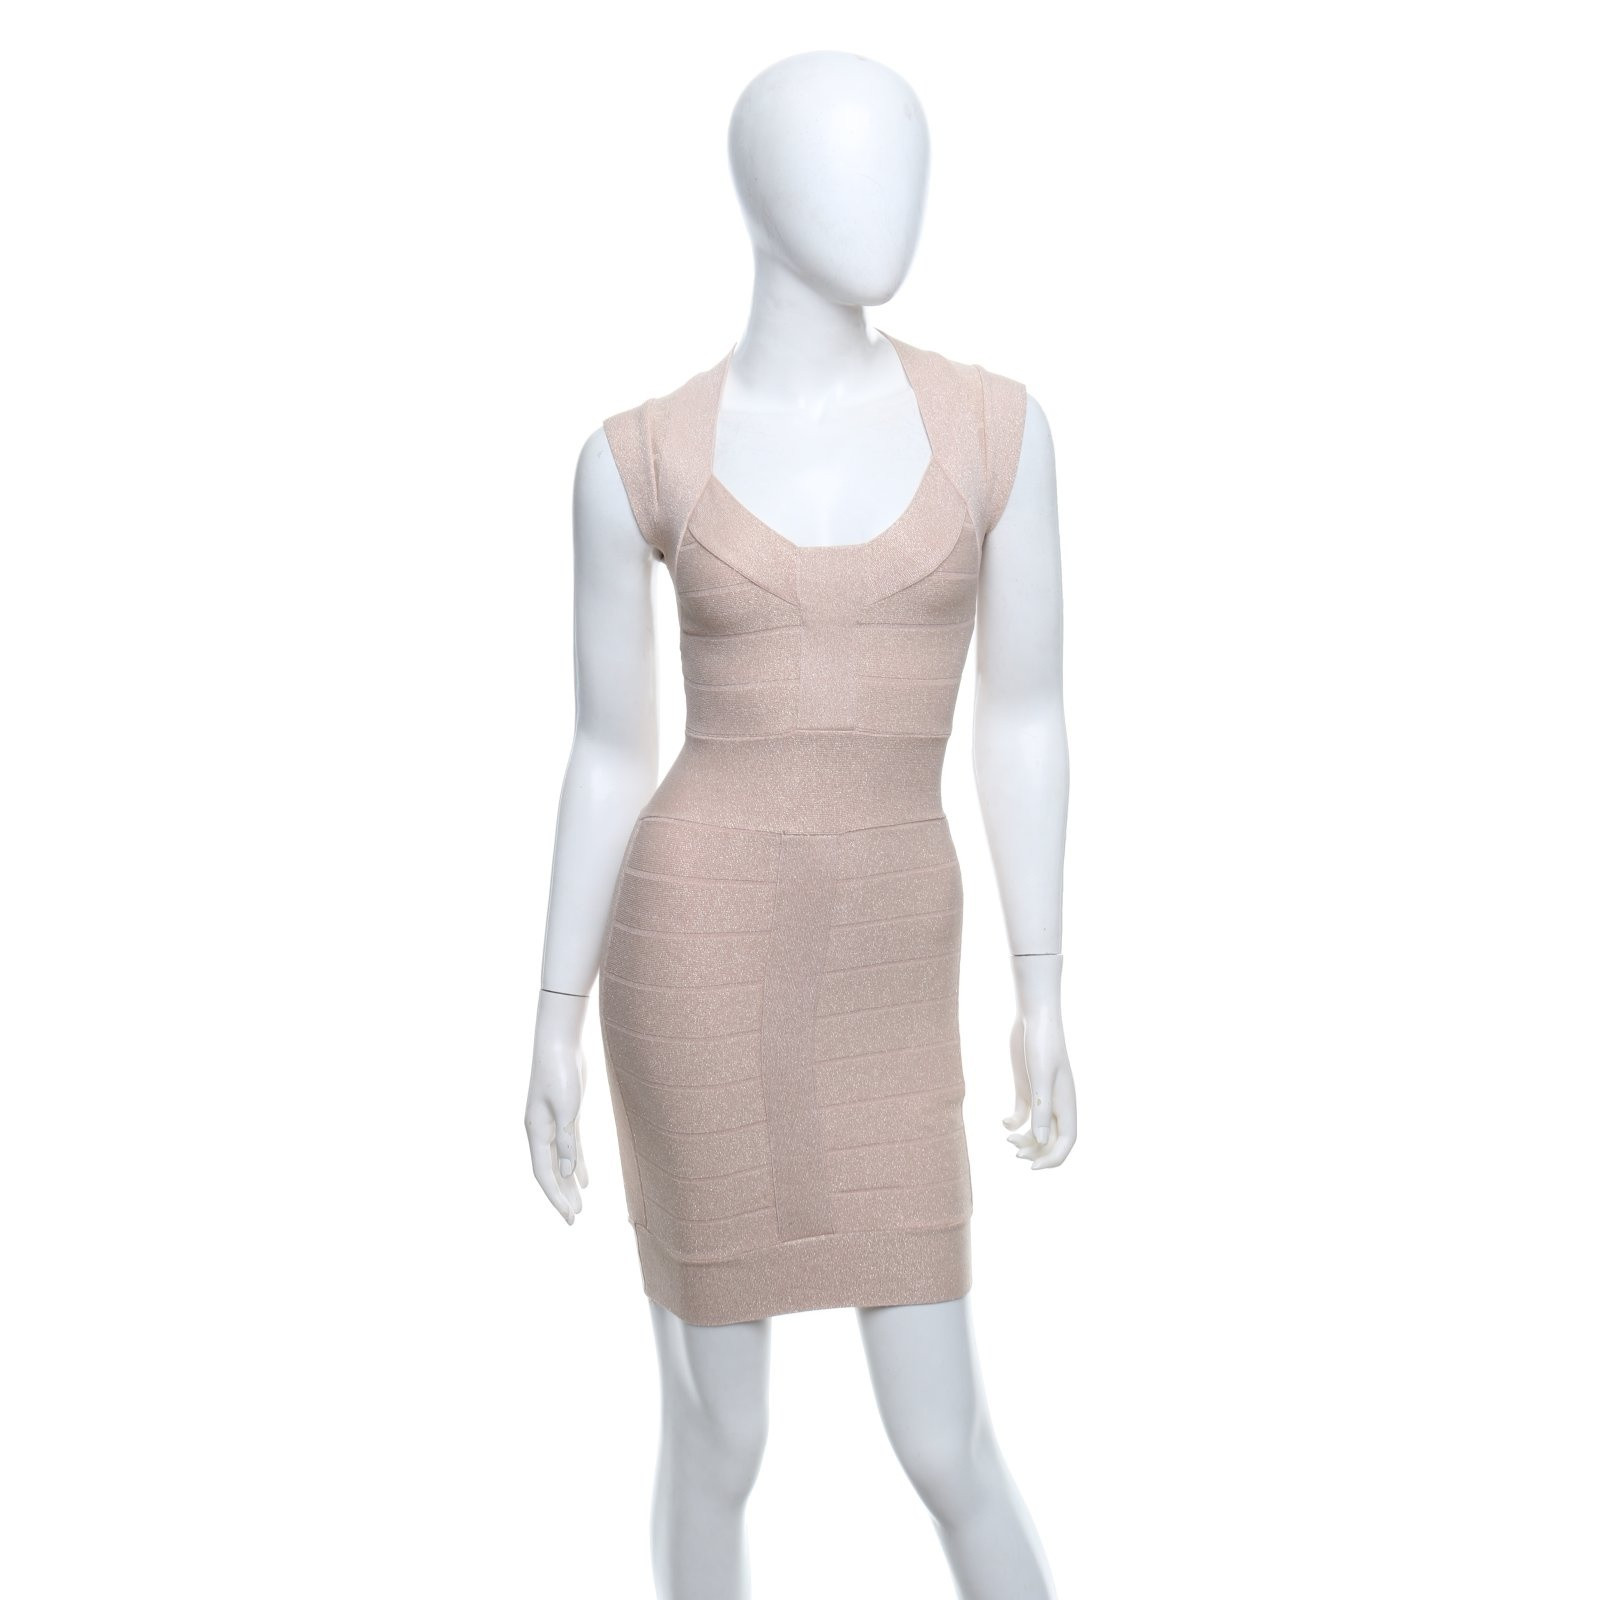 FRENCH CONNECTION Women's Dress in Nude Size: UK 6